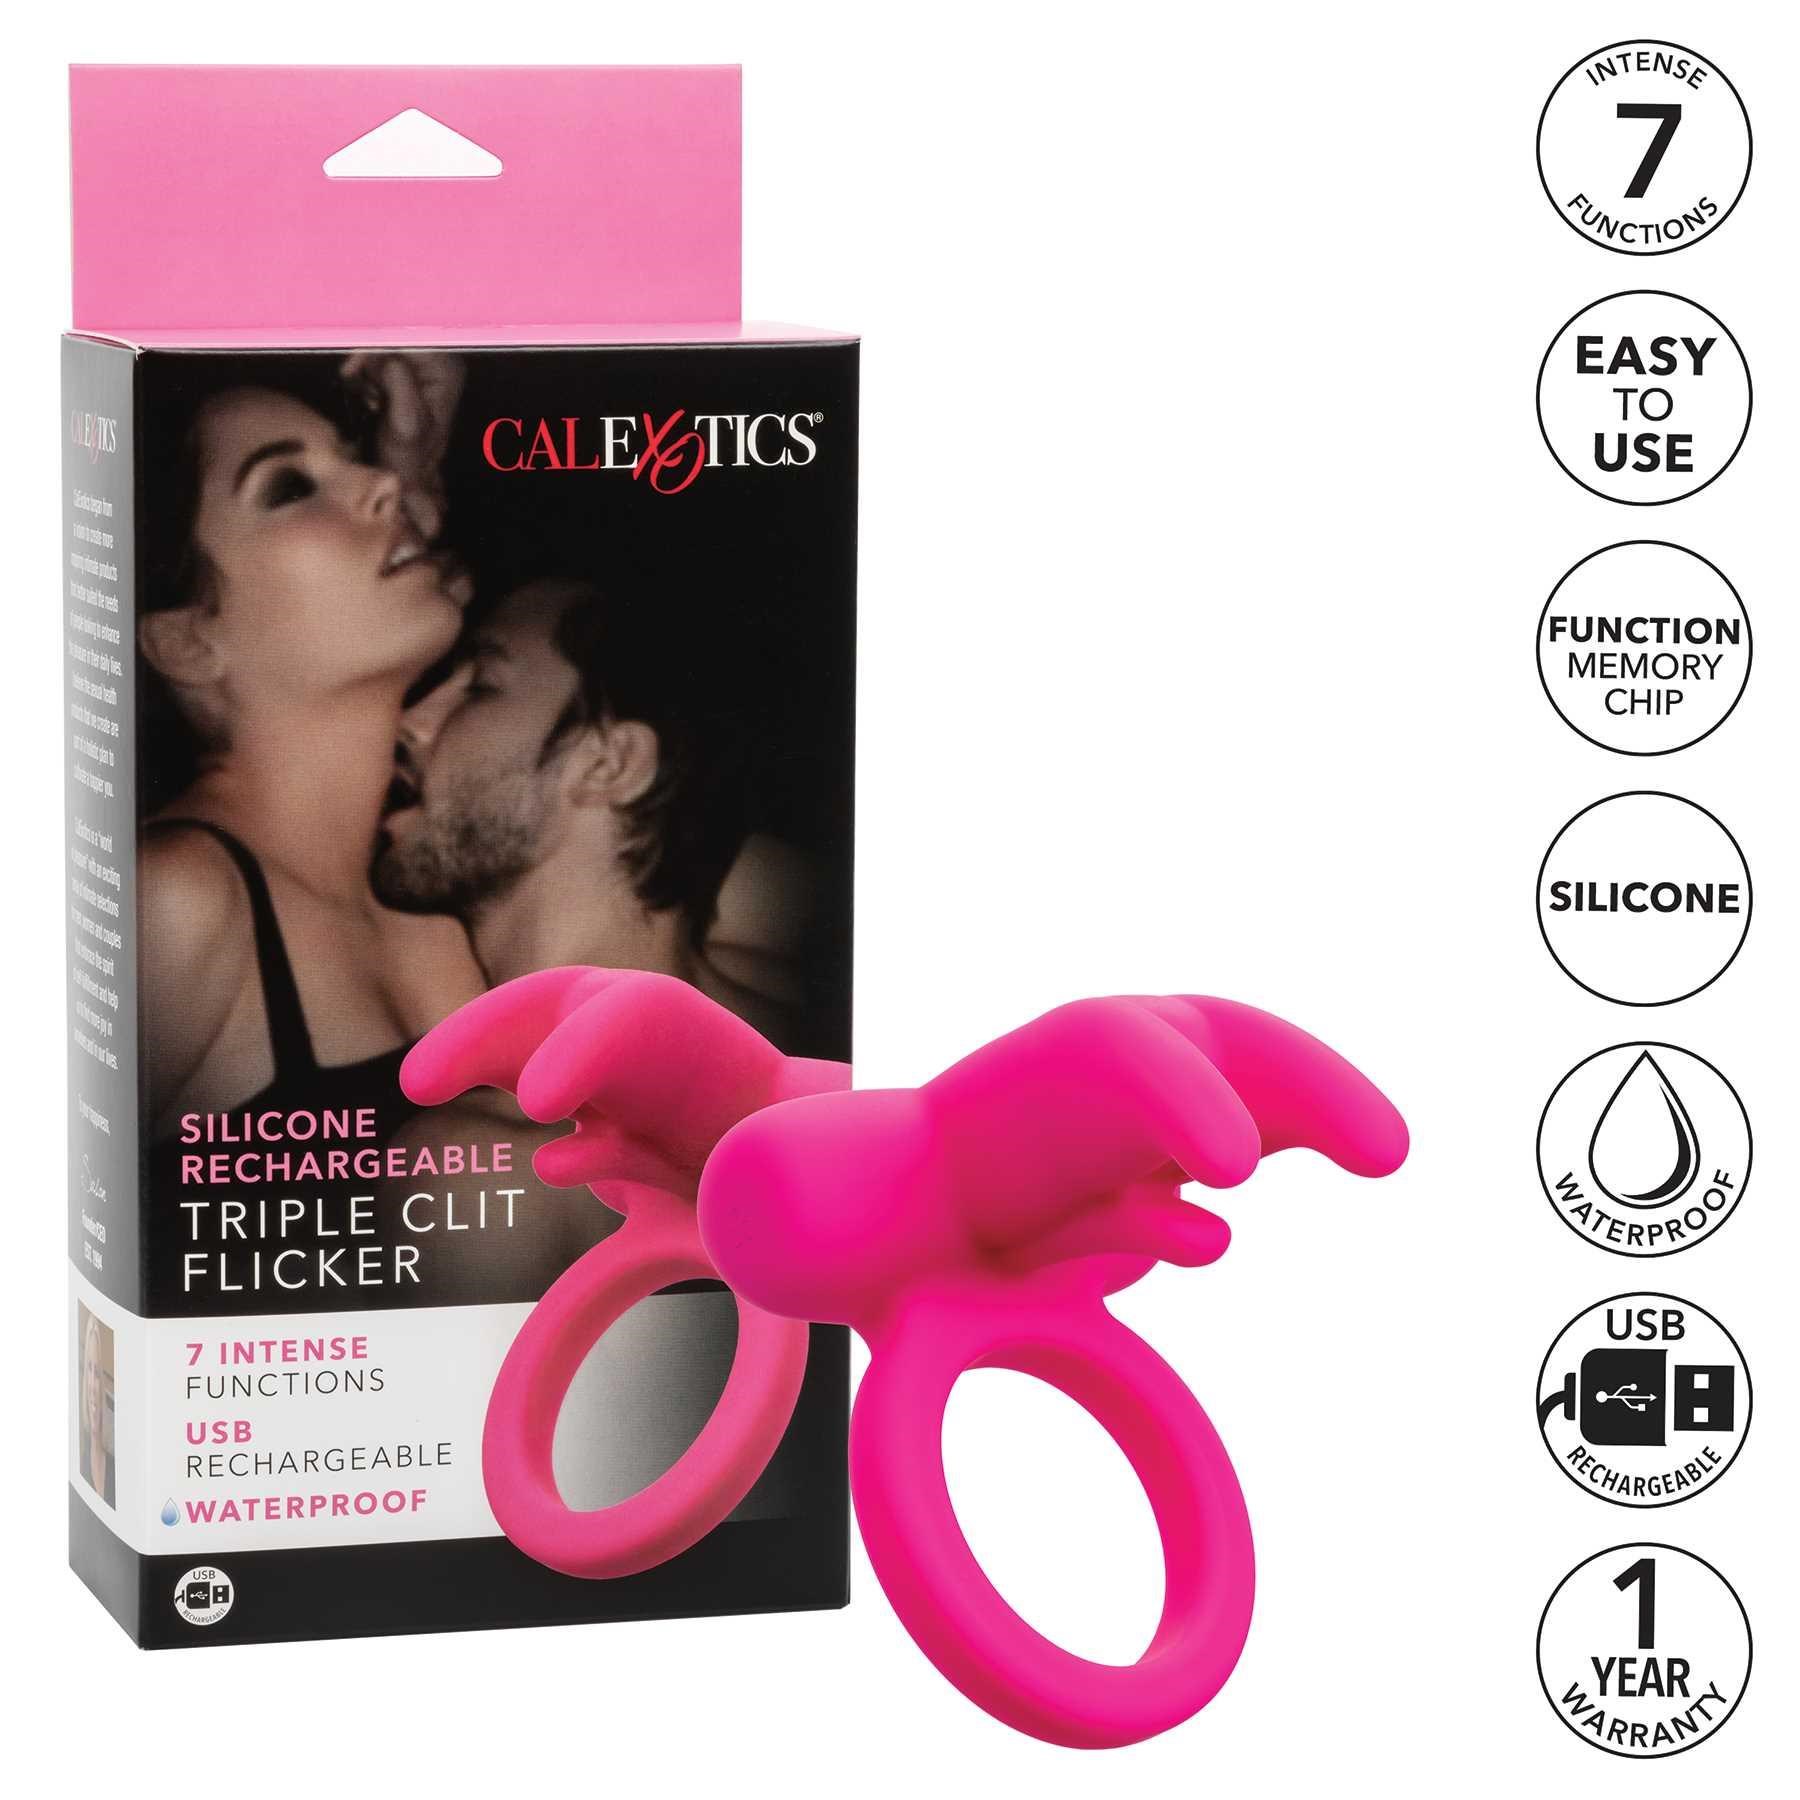 silicone triple clit flicker with packaging and features list